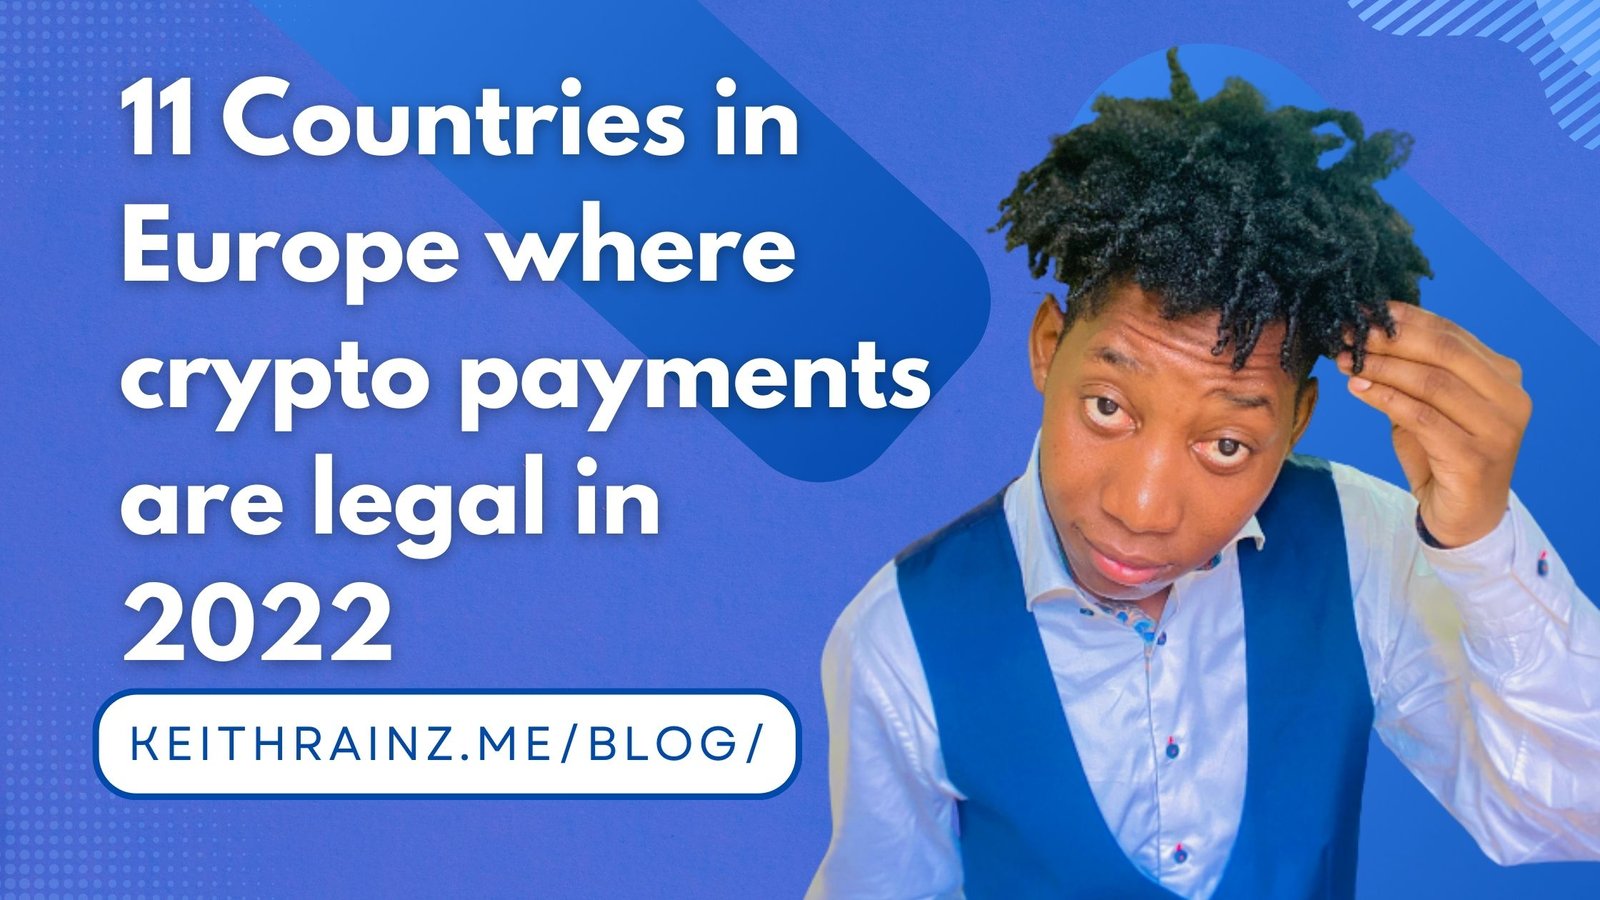 11 Countries in Europe where crypto payments are legal in 2022